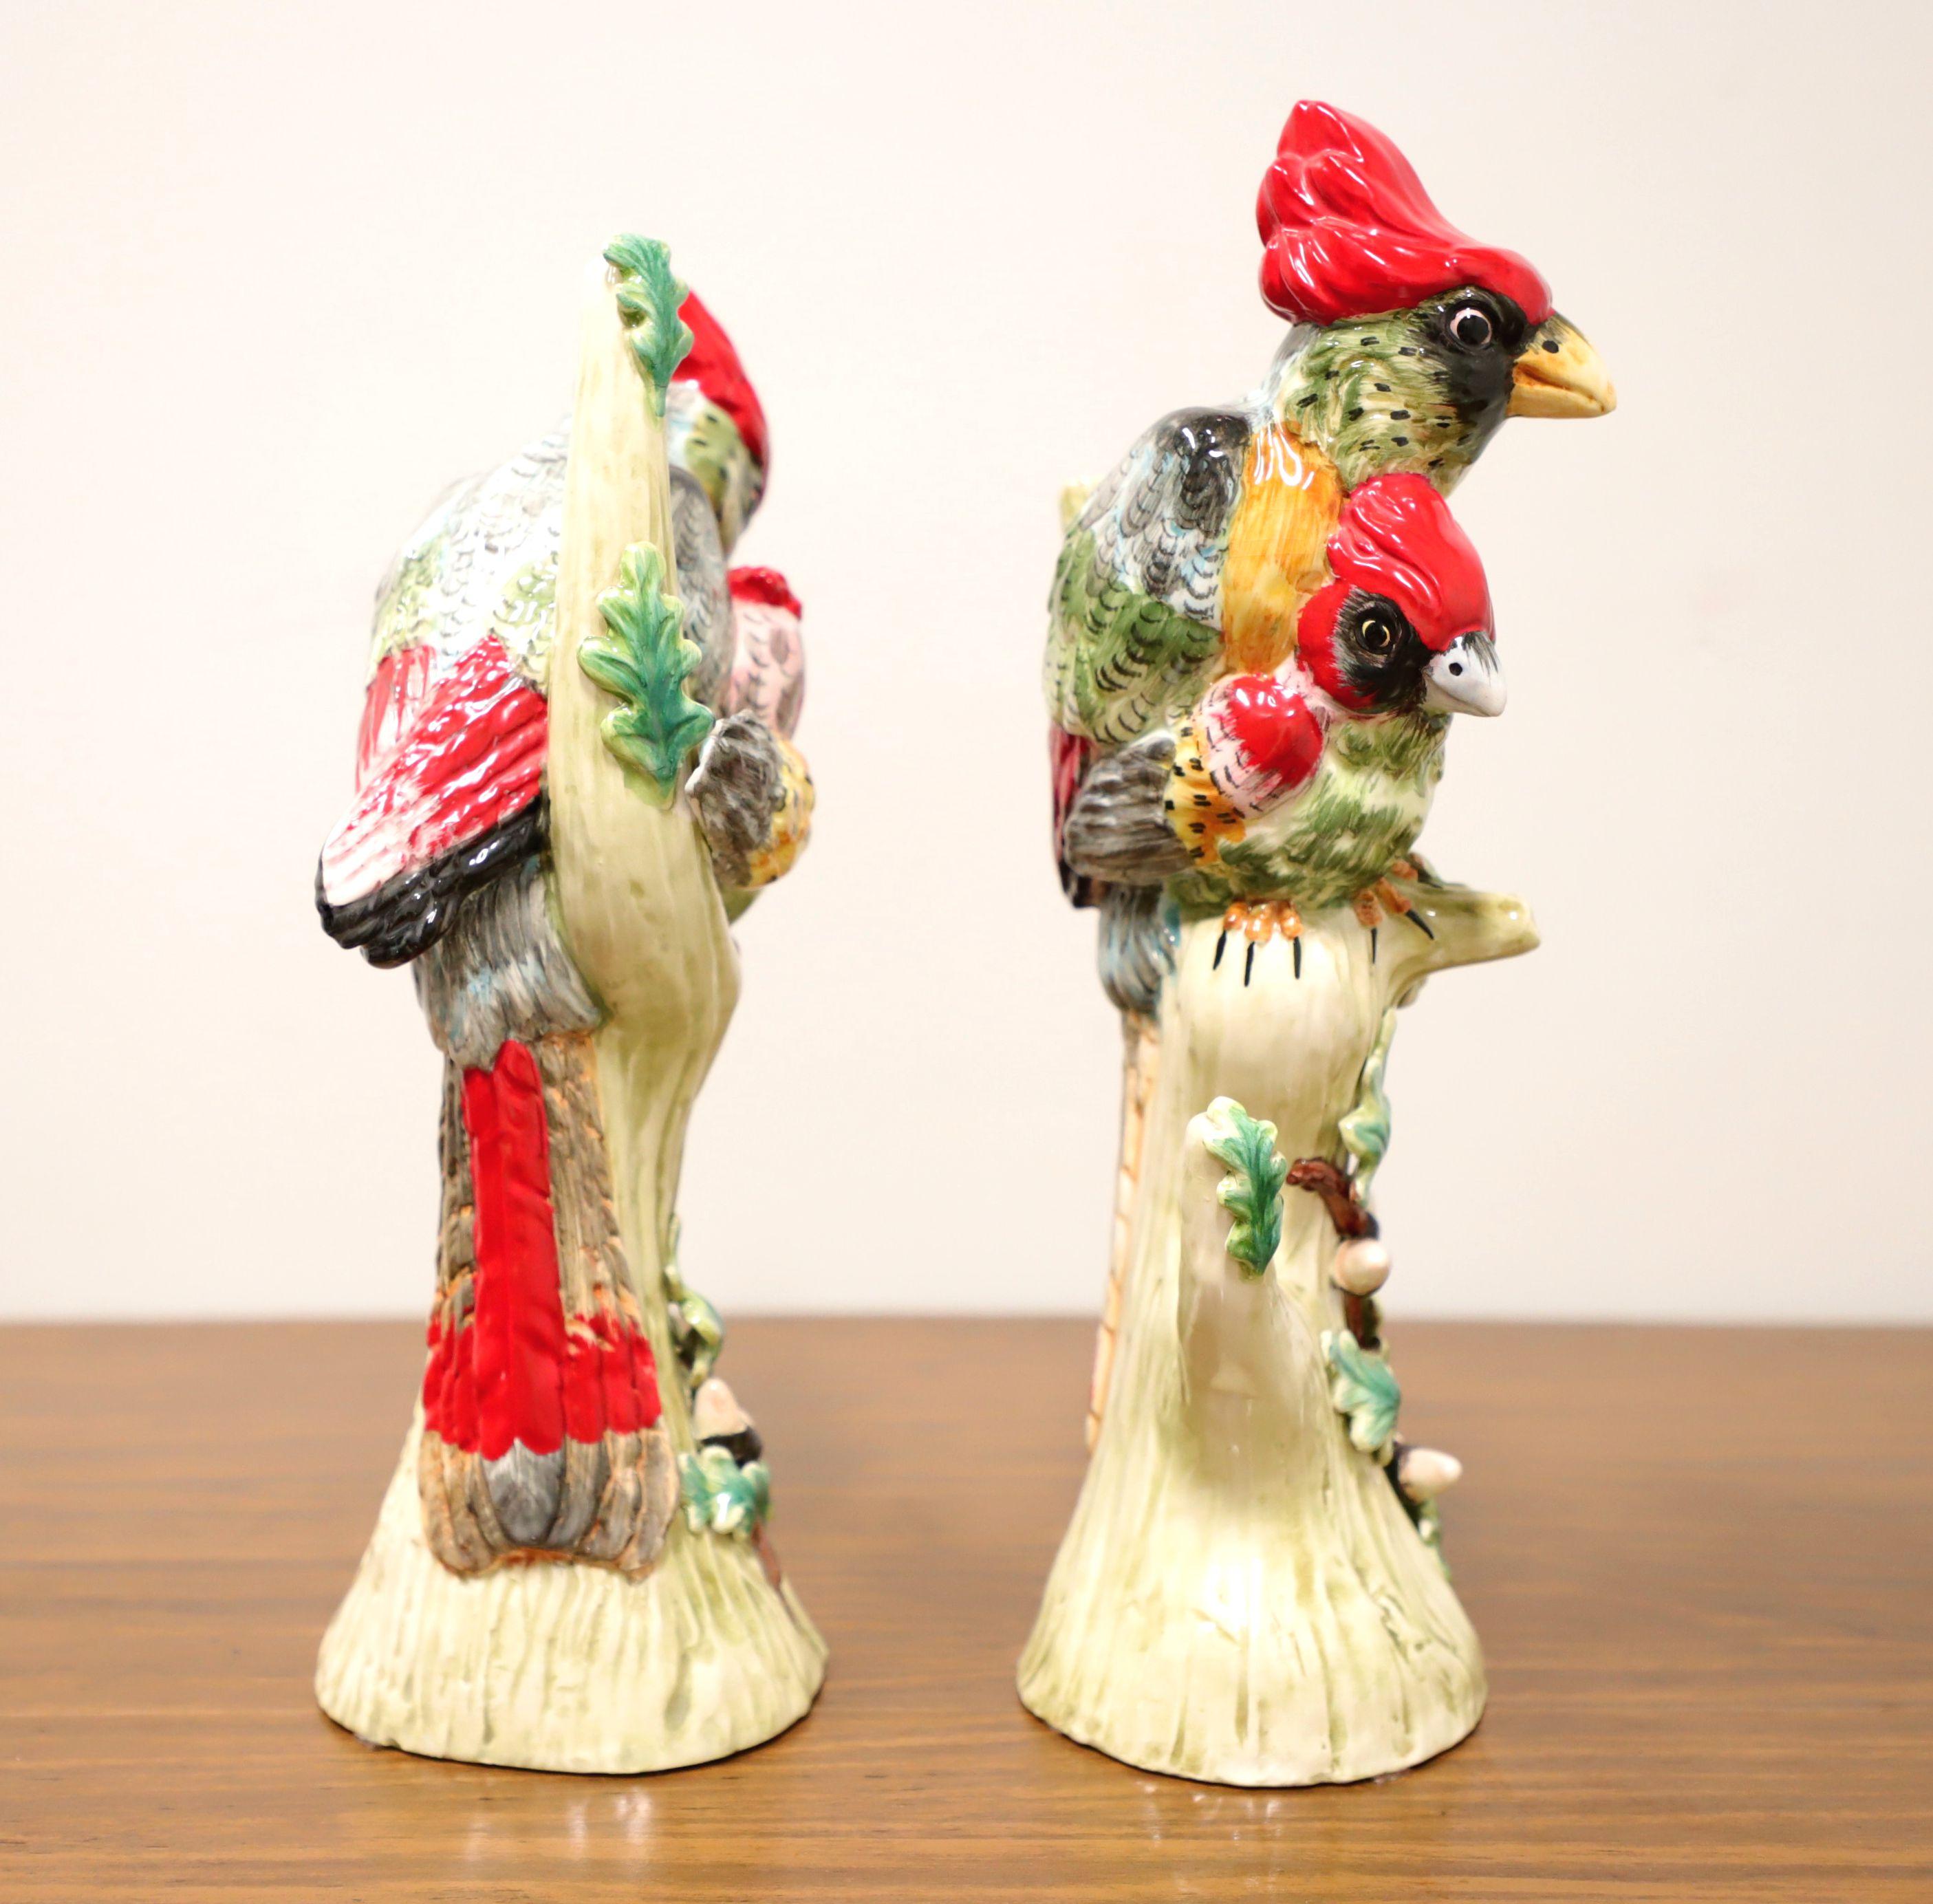 A pair of porcelain figurines depicting female cardinals on tree branches. Multi-colored porcelain of primarily red, black and shades of green, and glazed. Unsigned, artist unknown. Underside of one figurine is stamped 